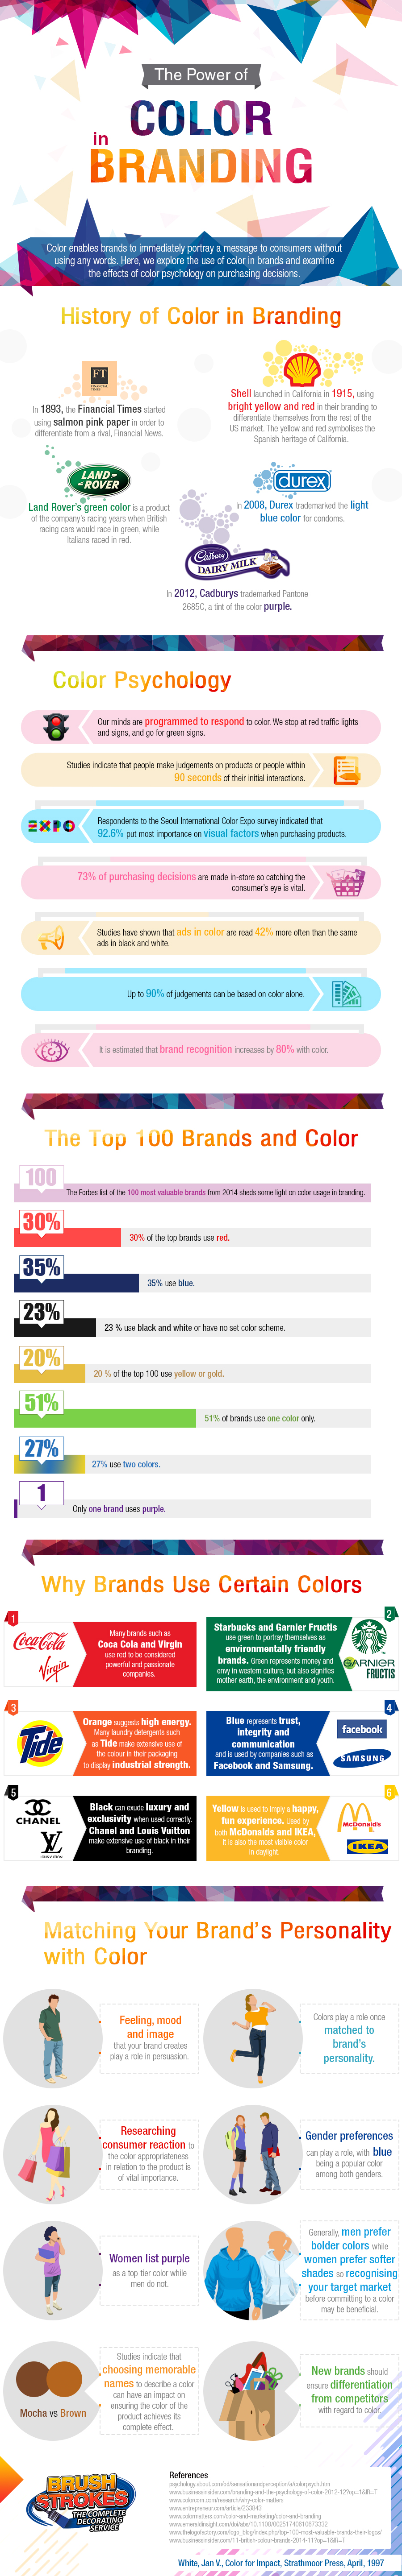 The-Power-of-Color-in-Branding-Infographic-US